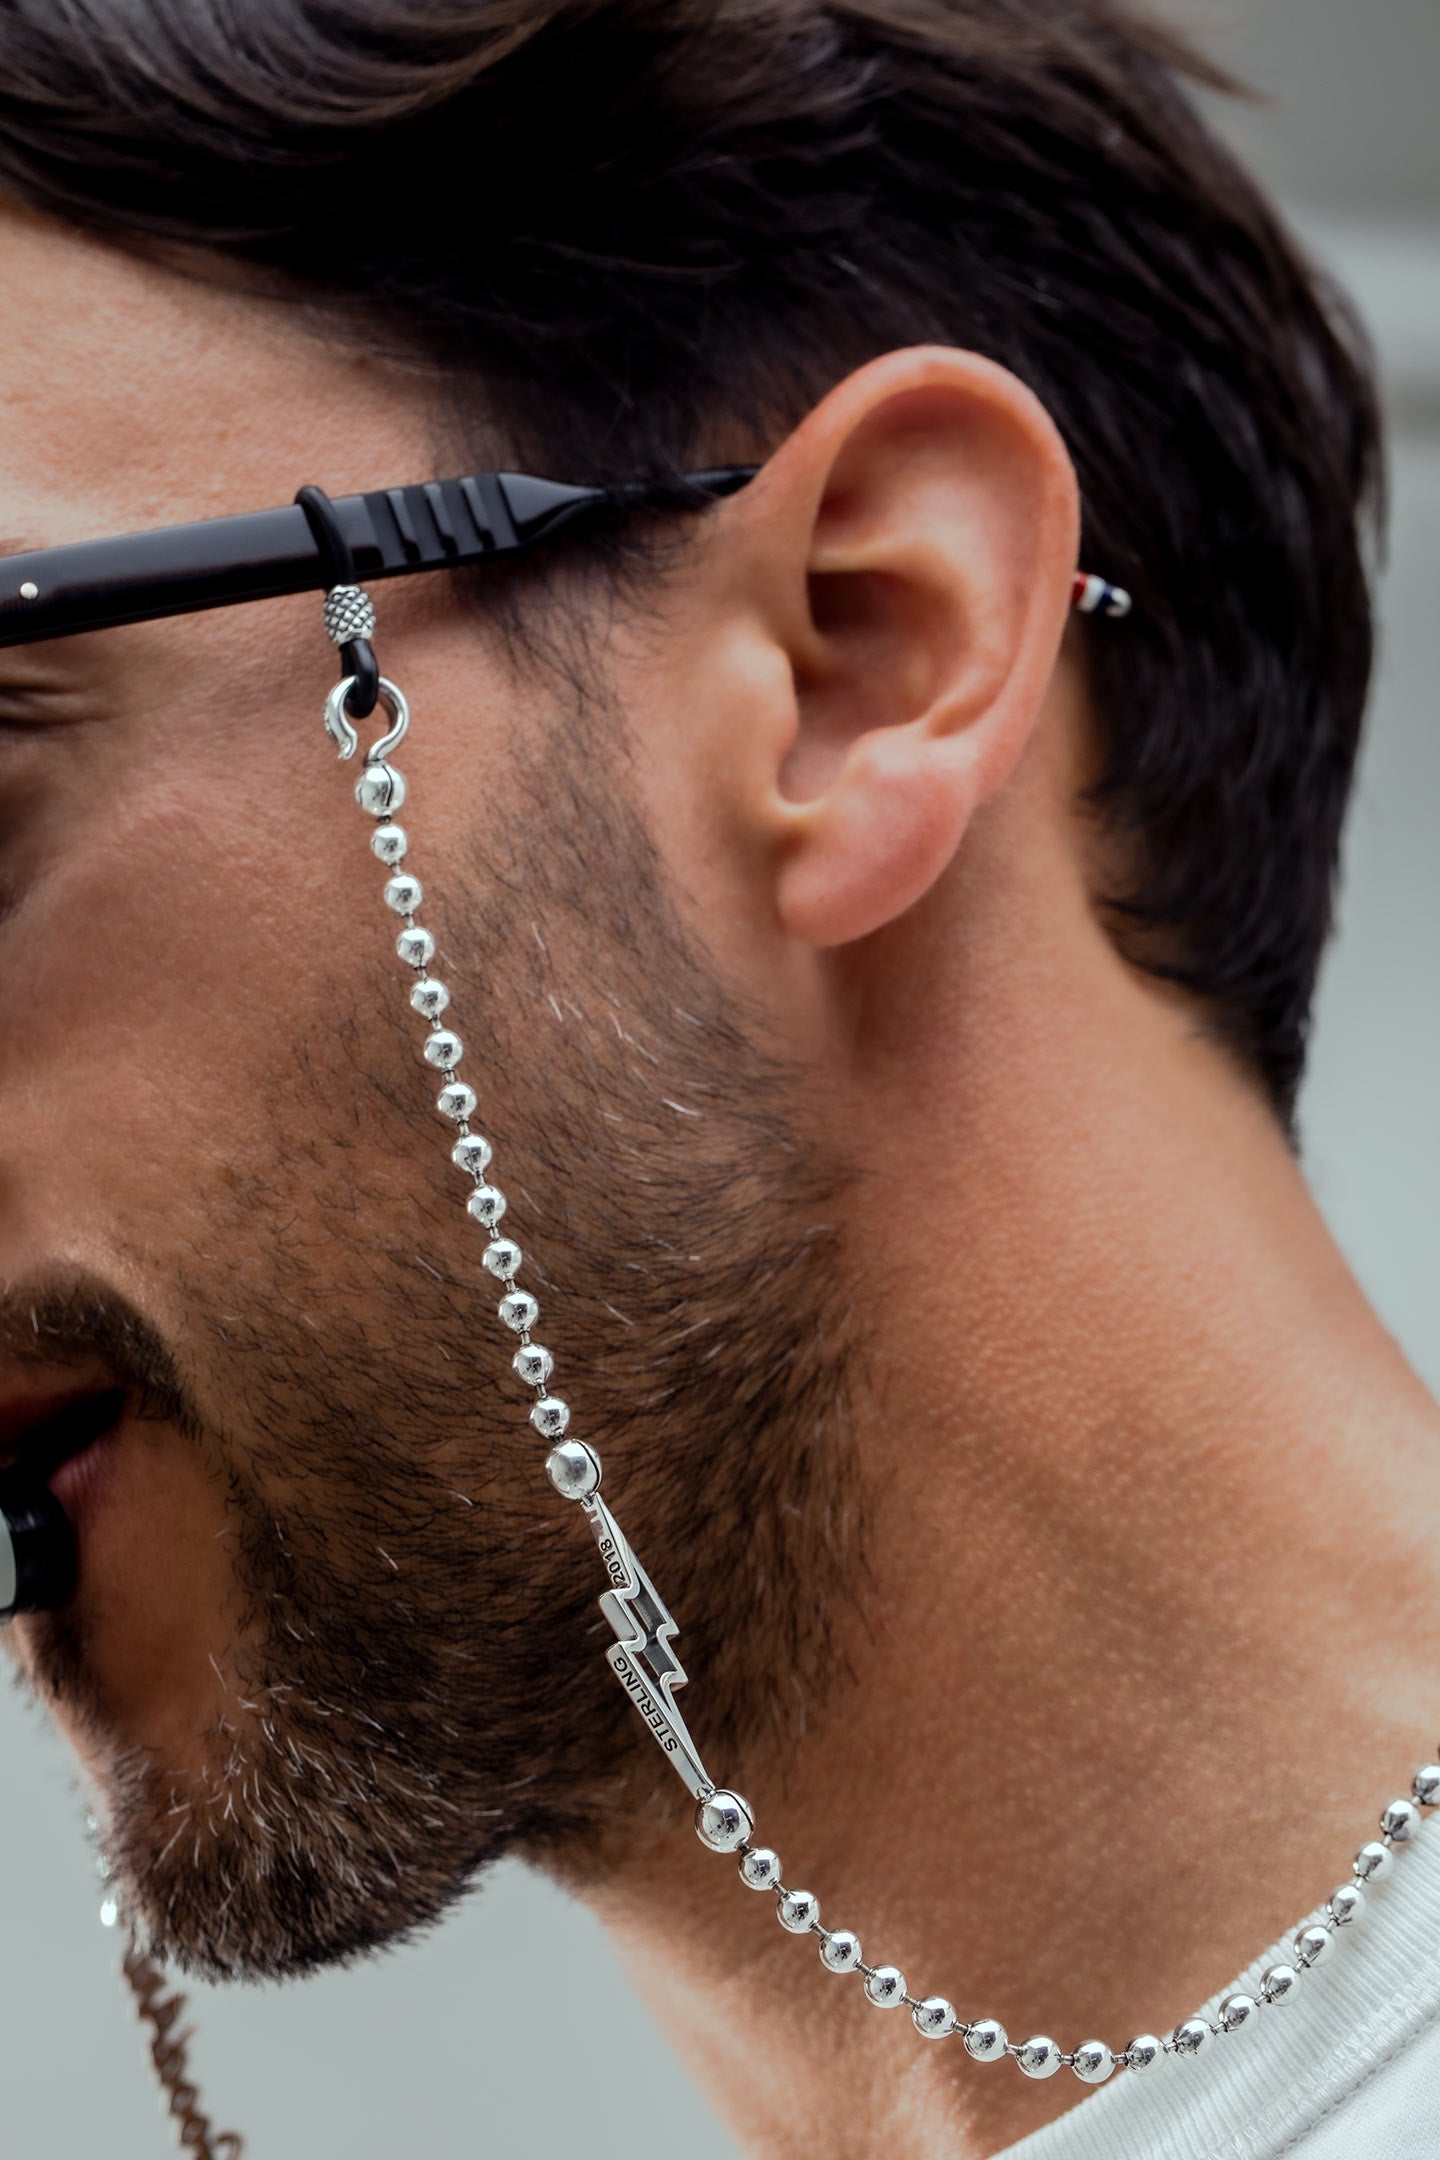 The Librarian Eye Glasses Chain